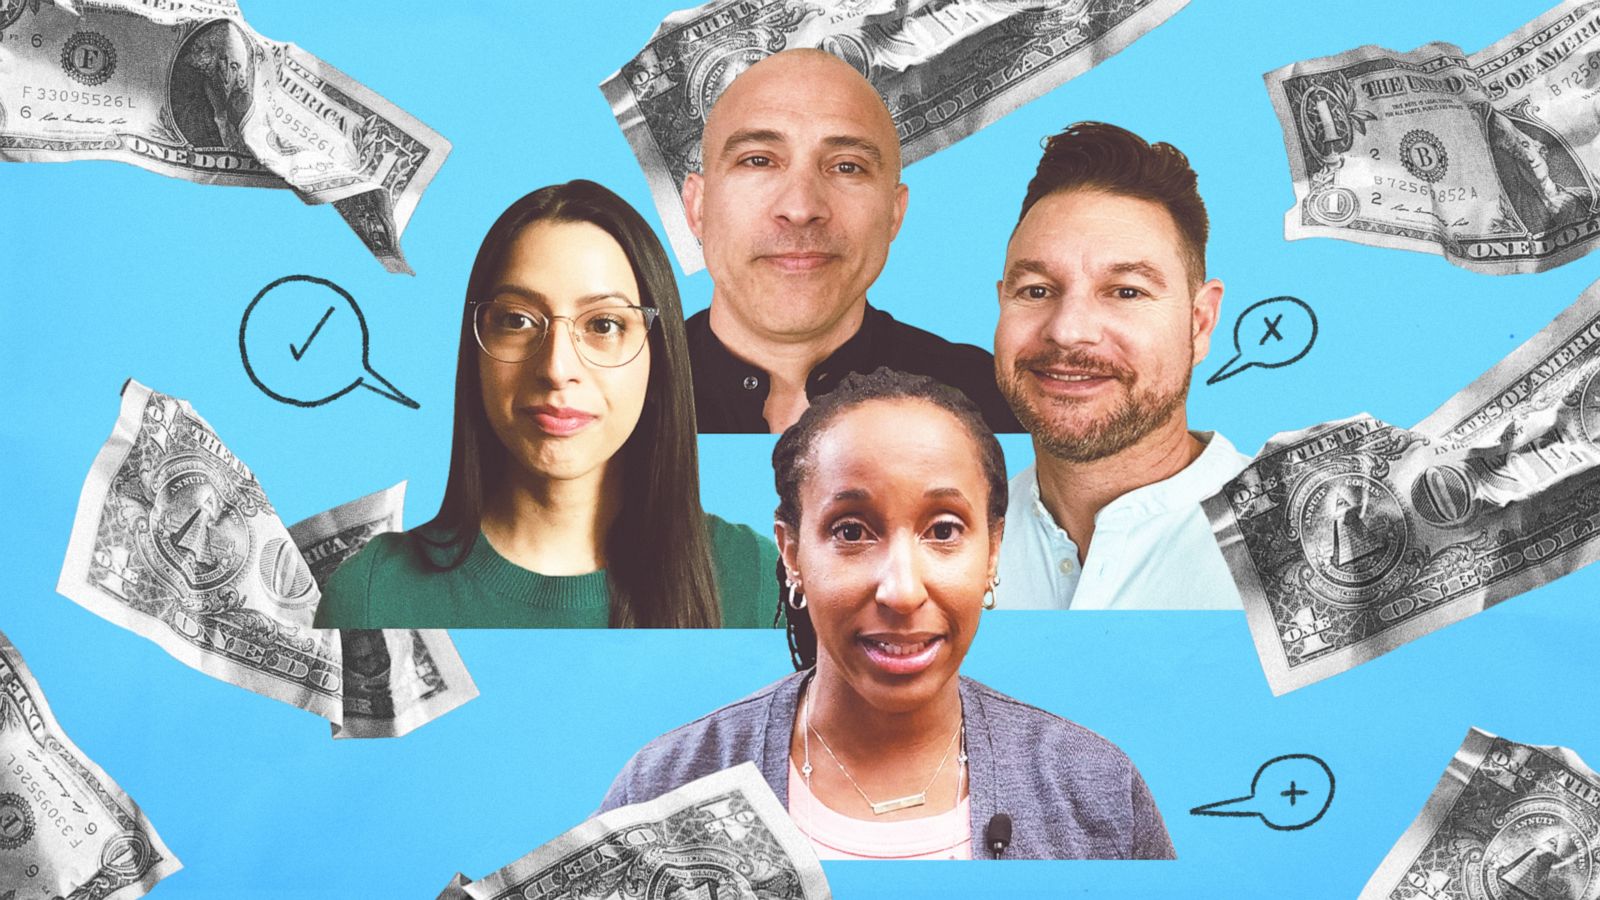 PHOTO: These financial influencers, who developed their own unique methods to pay down hundreds of thousands of dollars in debt, share advice for tackling your finances.